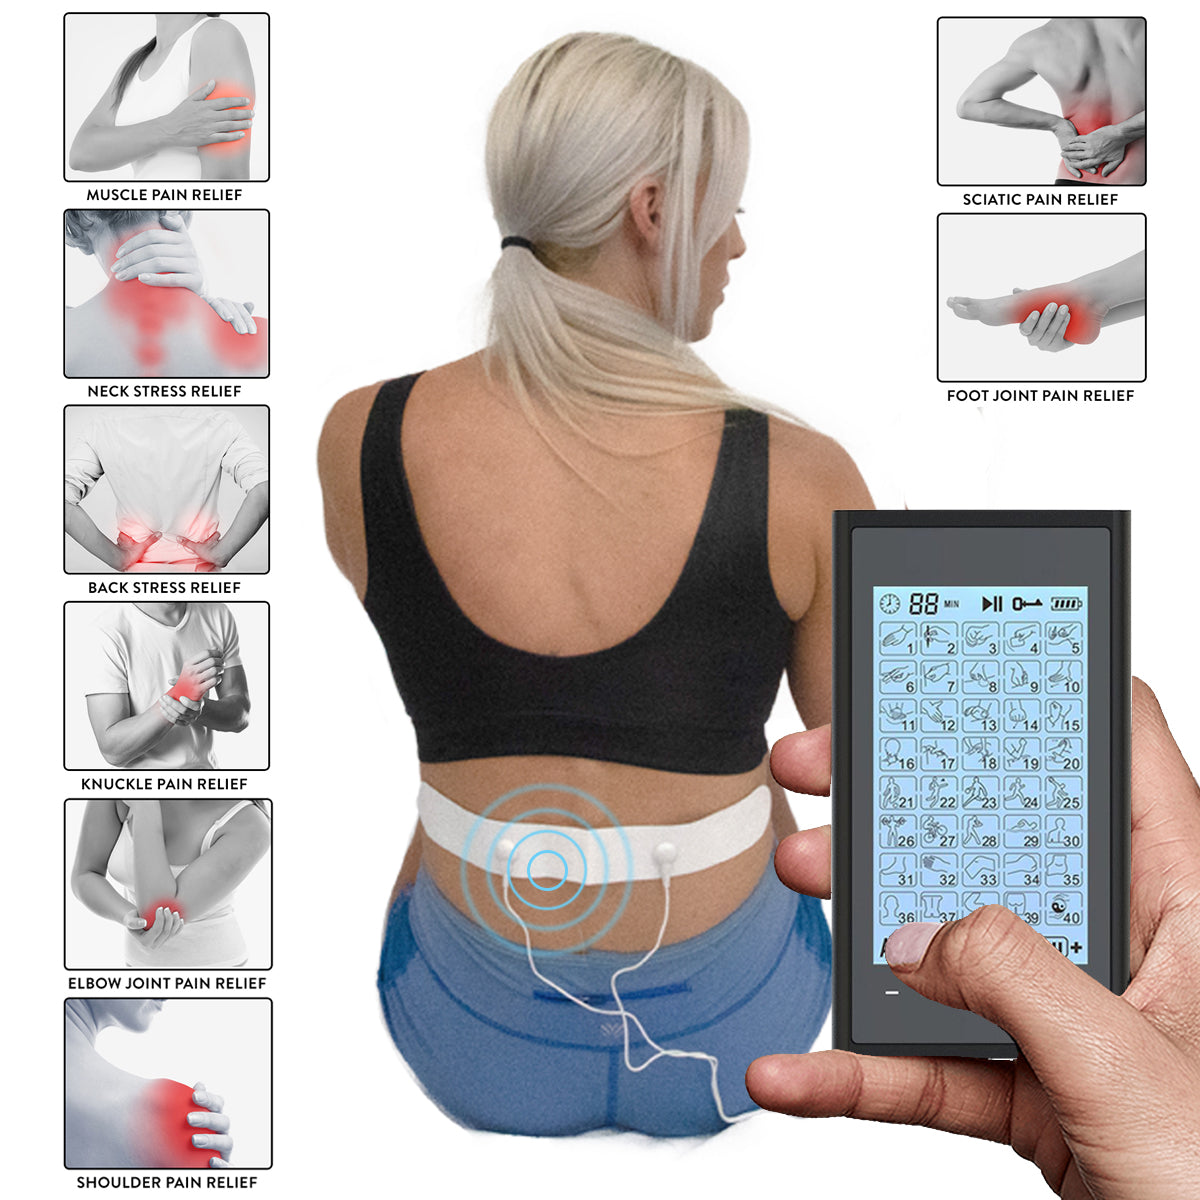 EMS TENS Unit Muscle Stimulator for Pain Relief Therapy,72 Modes